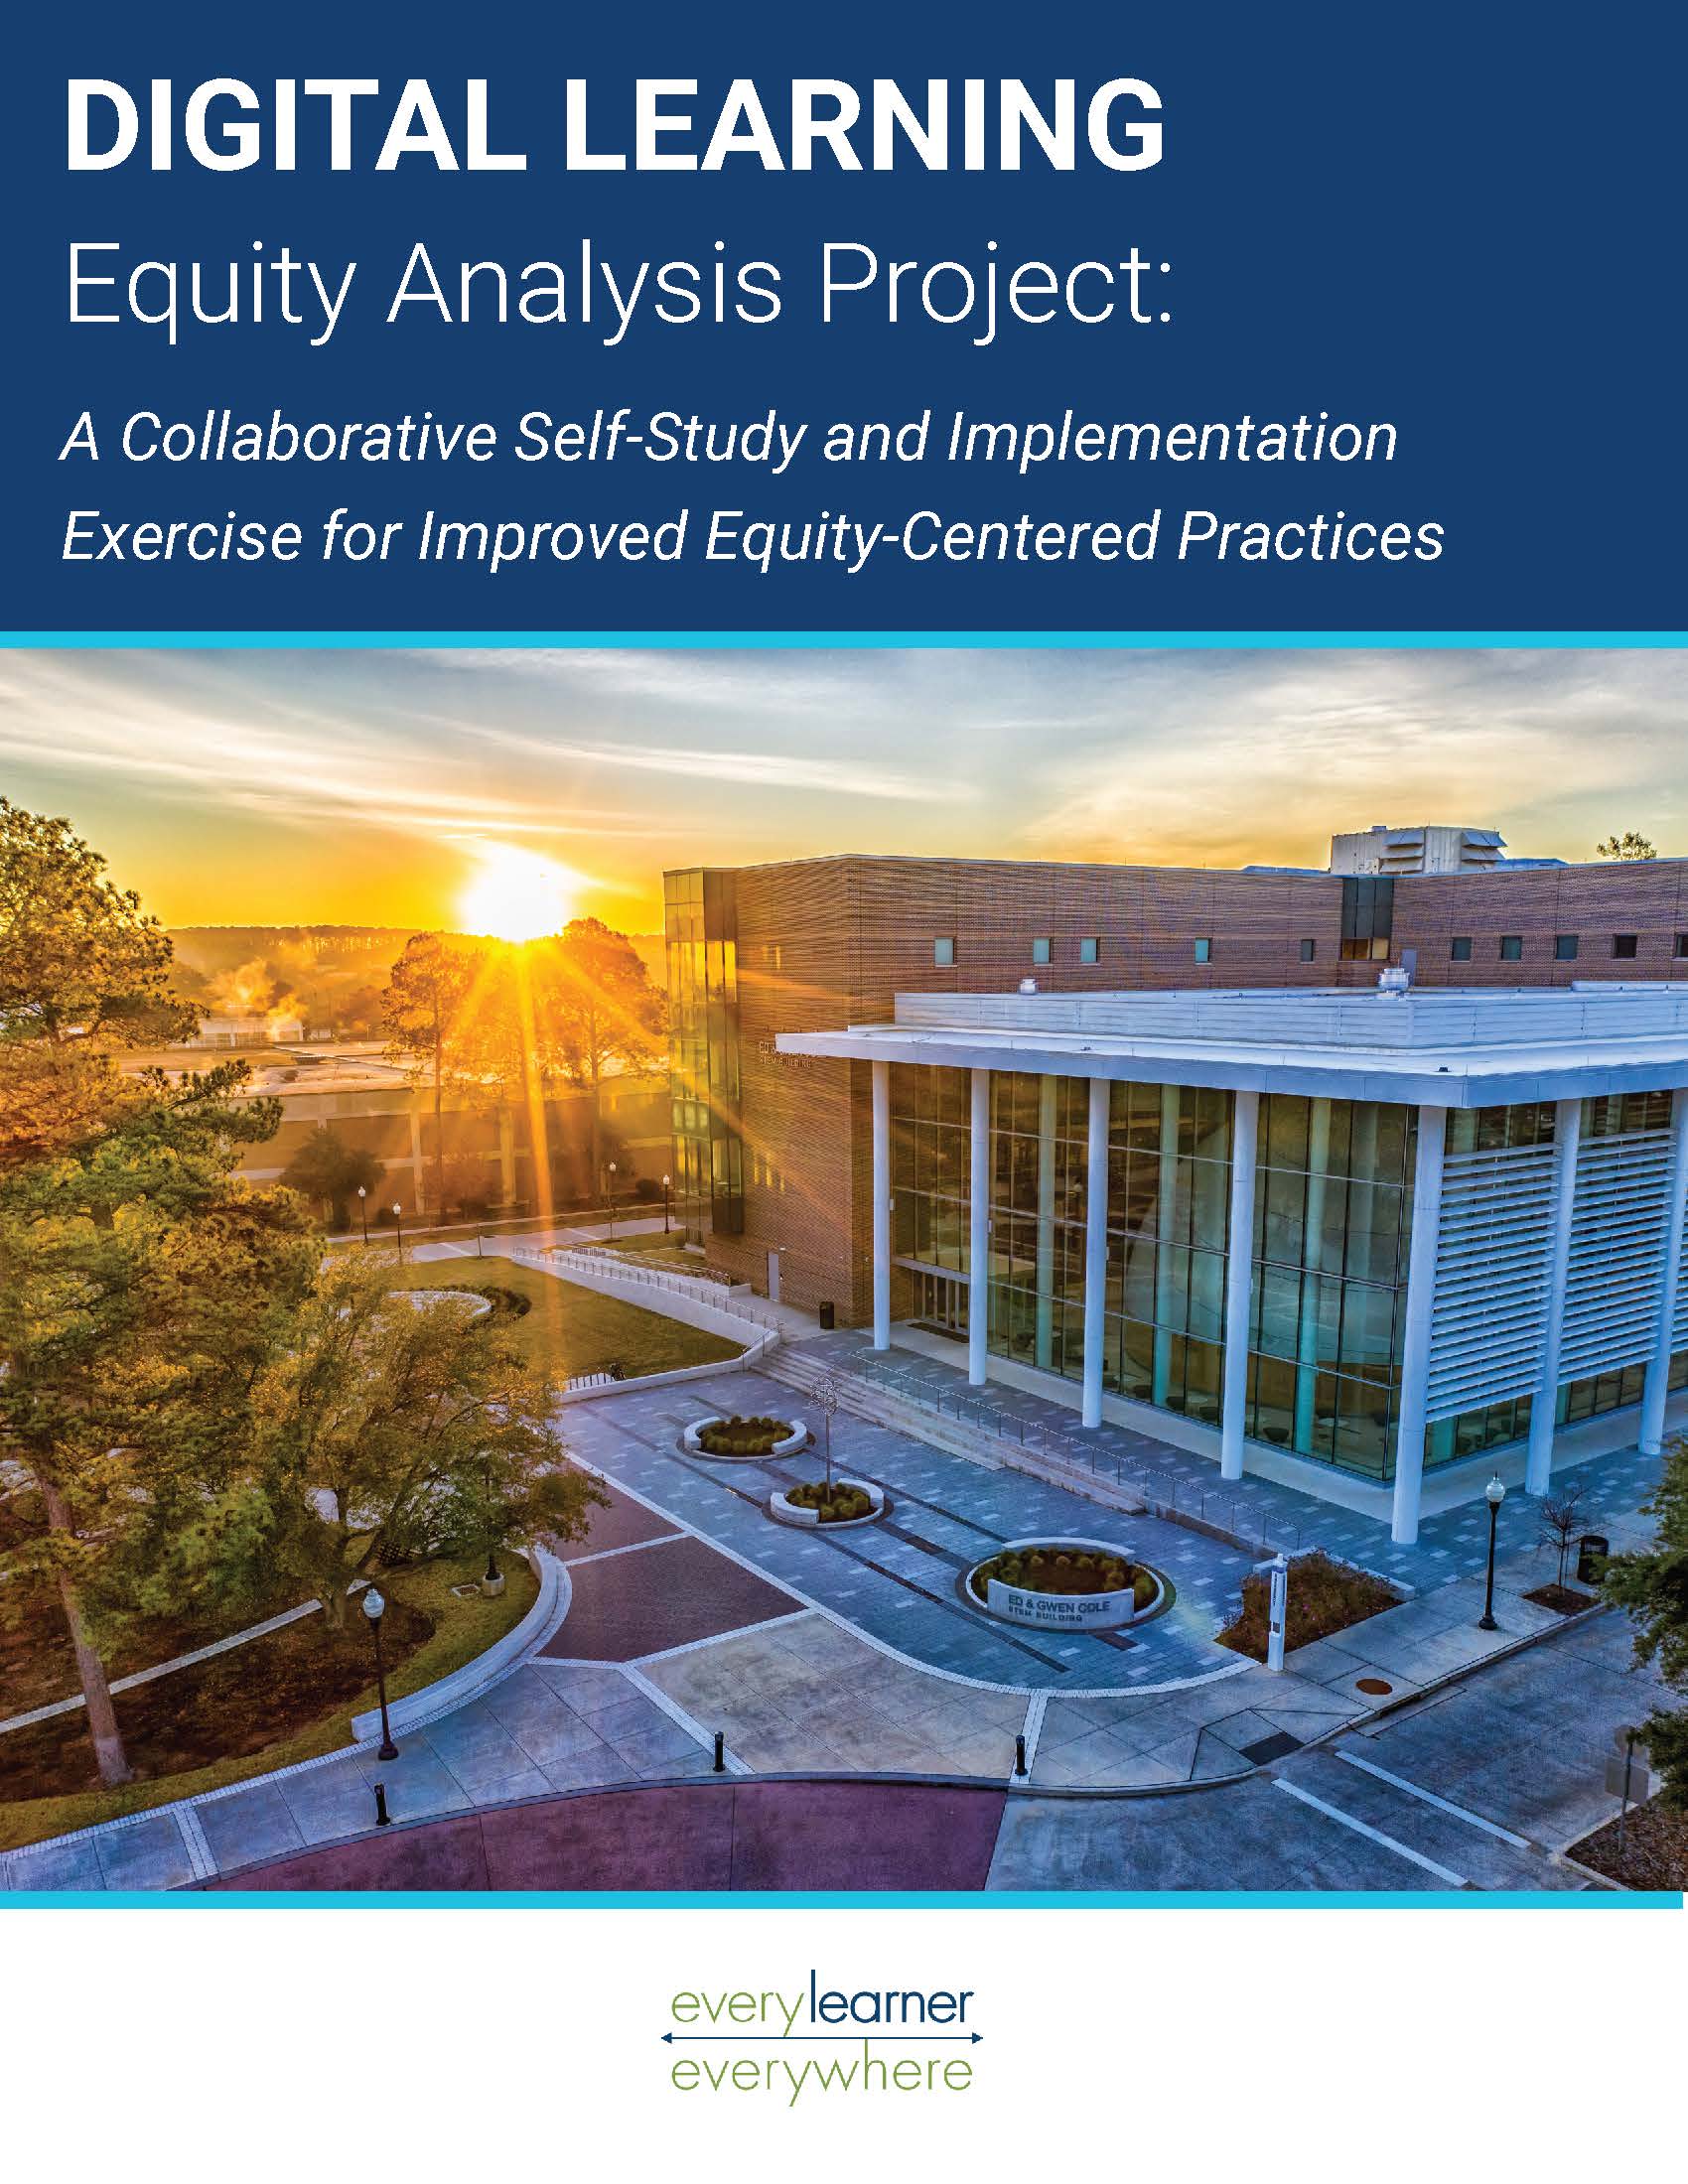 Digital Learning Equity Analysis Cover Page